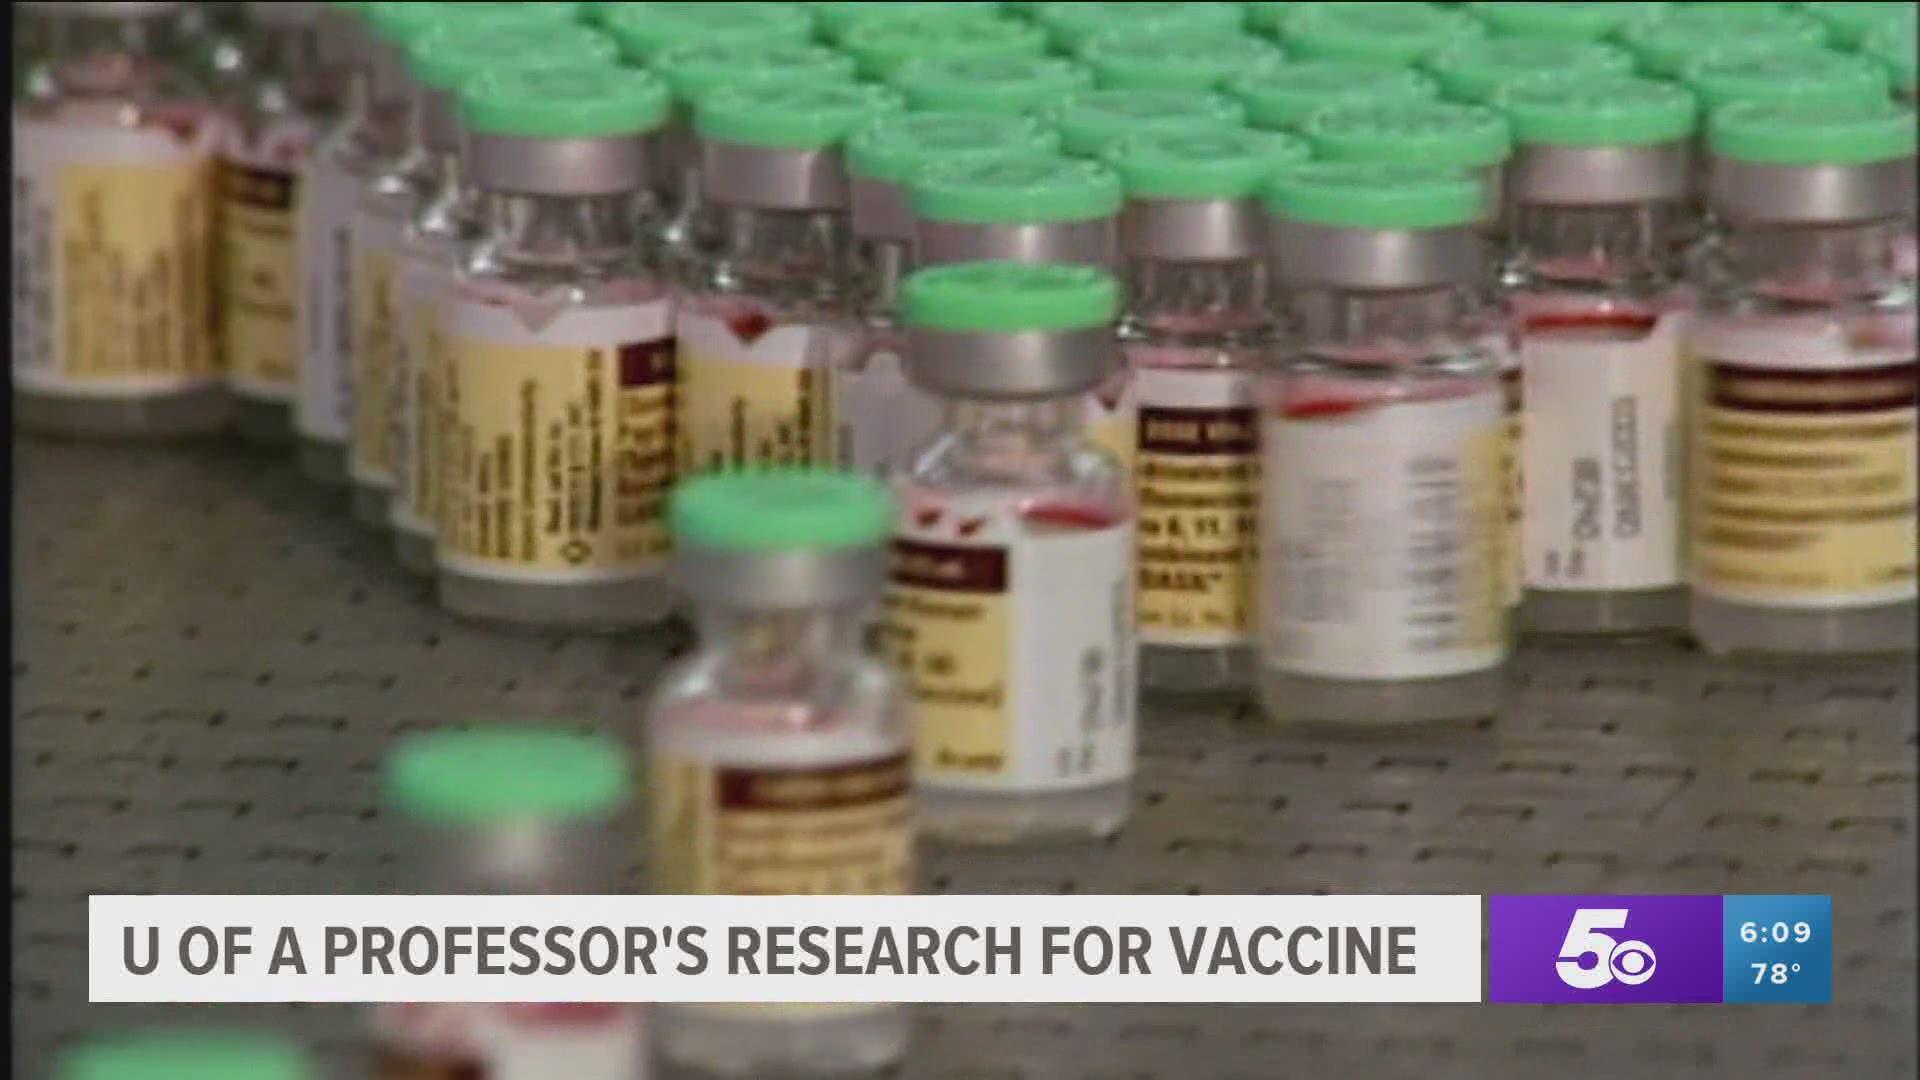 A University of Arkansas professor has been granted access to one of the countries most advanced supercomputers to research a vaccine for the coronavirus.